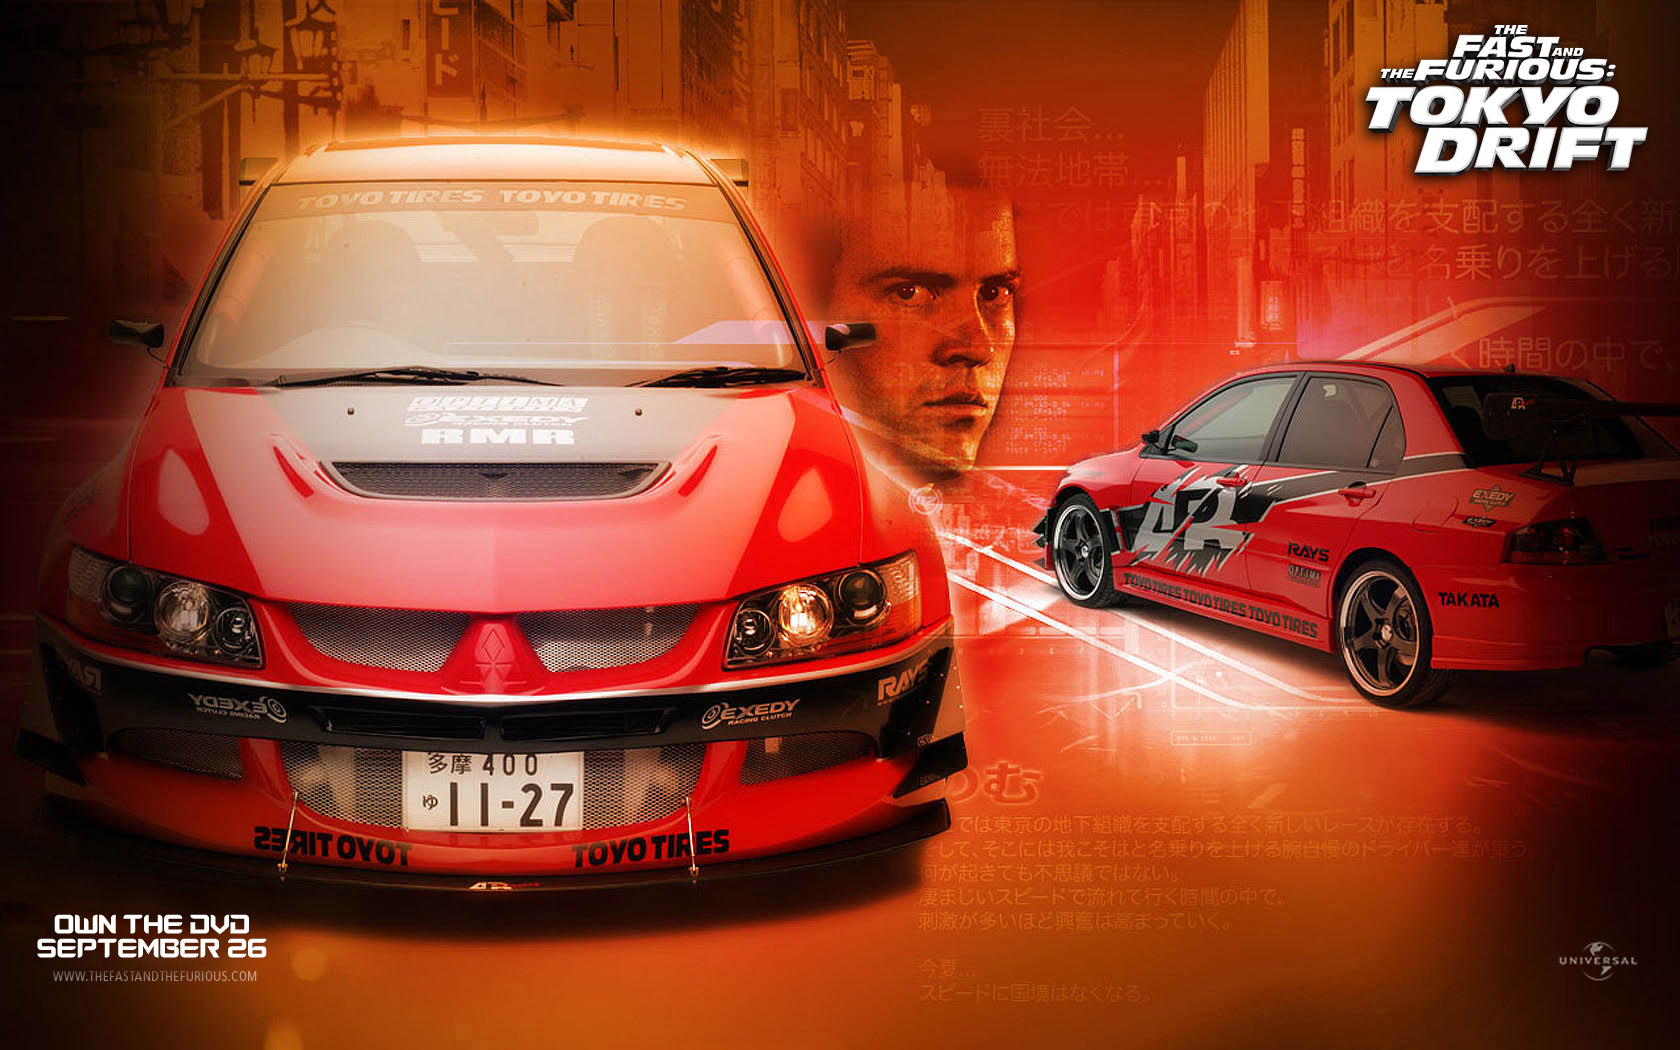 TFATF wallpaper the fast and the furious 367267 1680 1050jpg